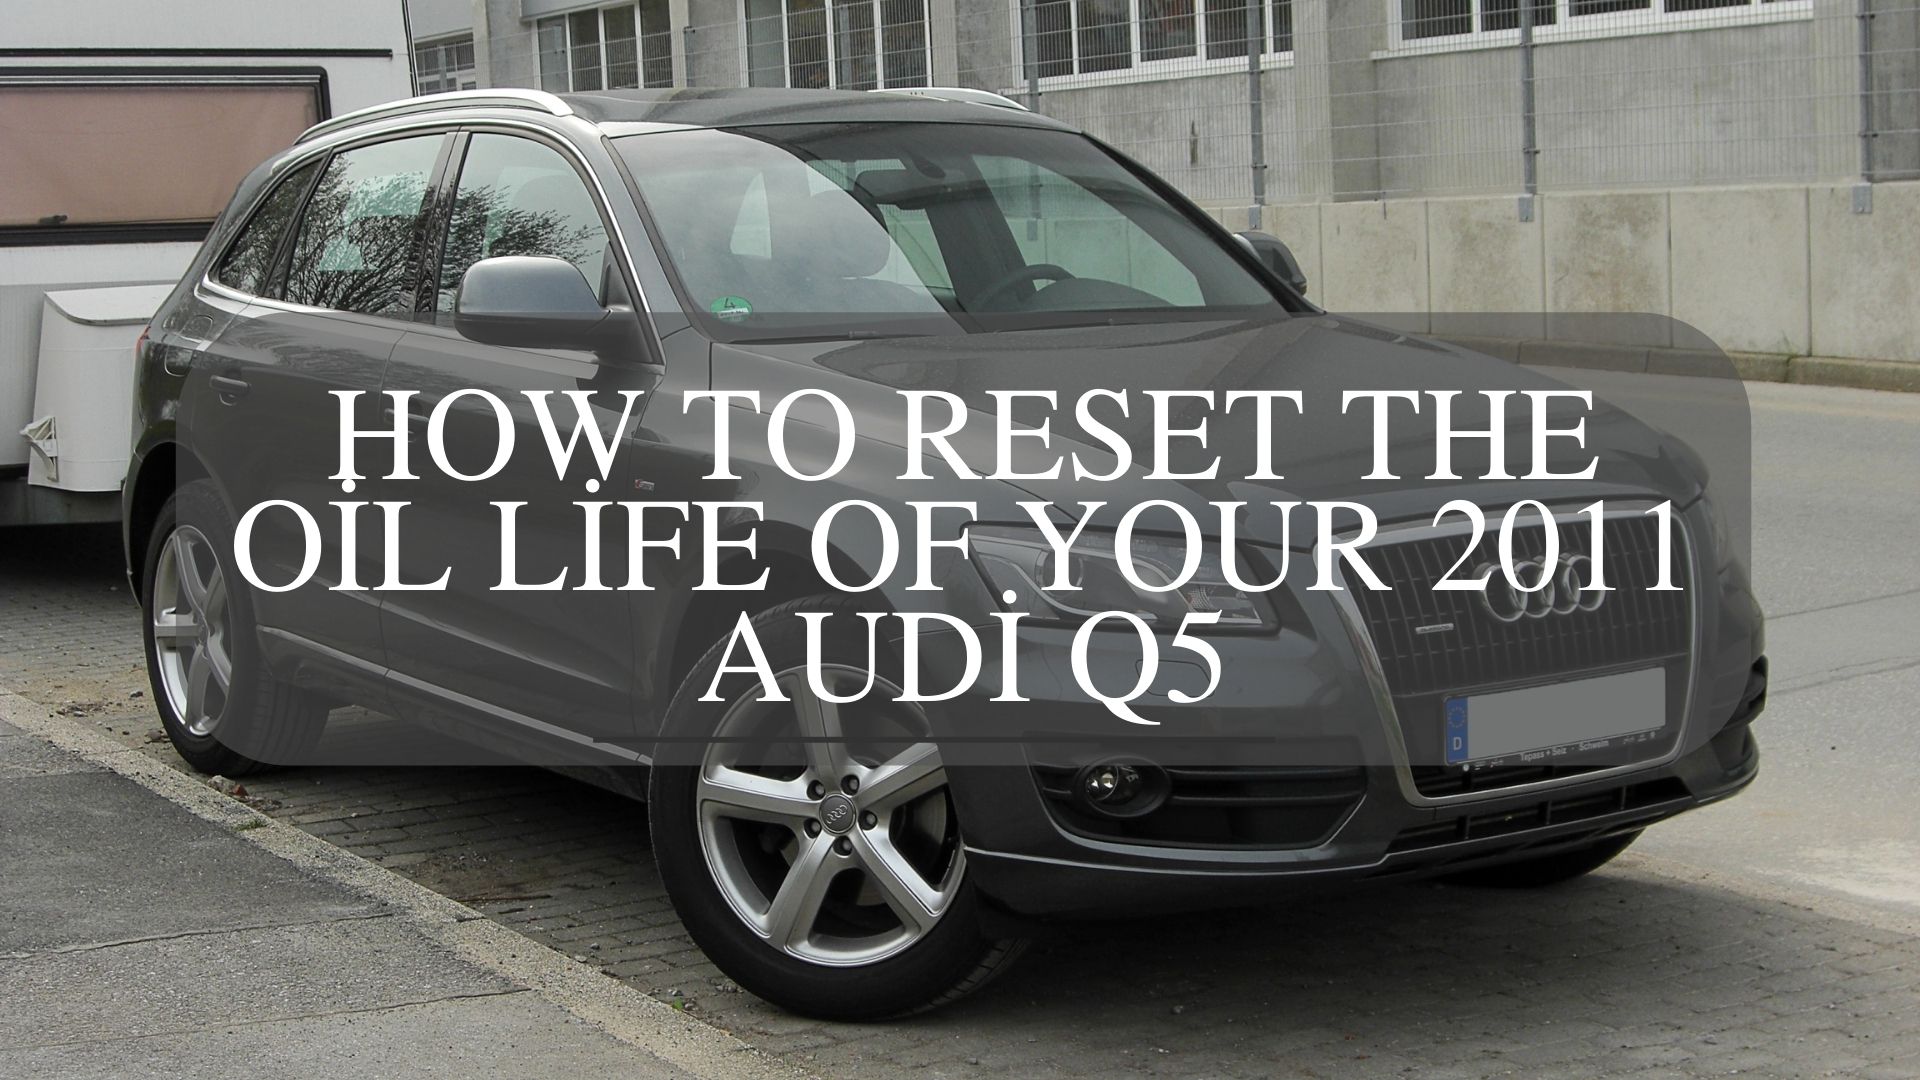 How to Reset the Oil Life of Your 2011 Audi Q5